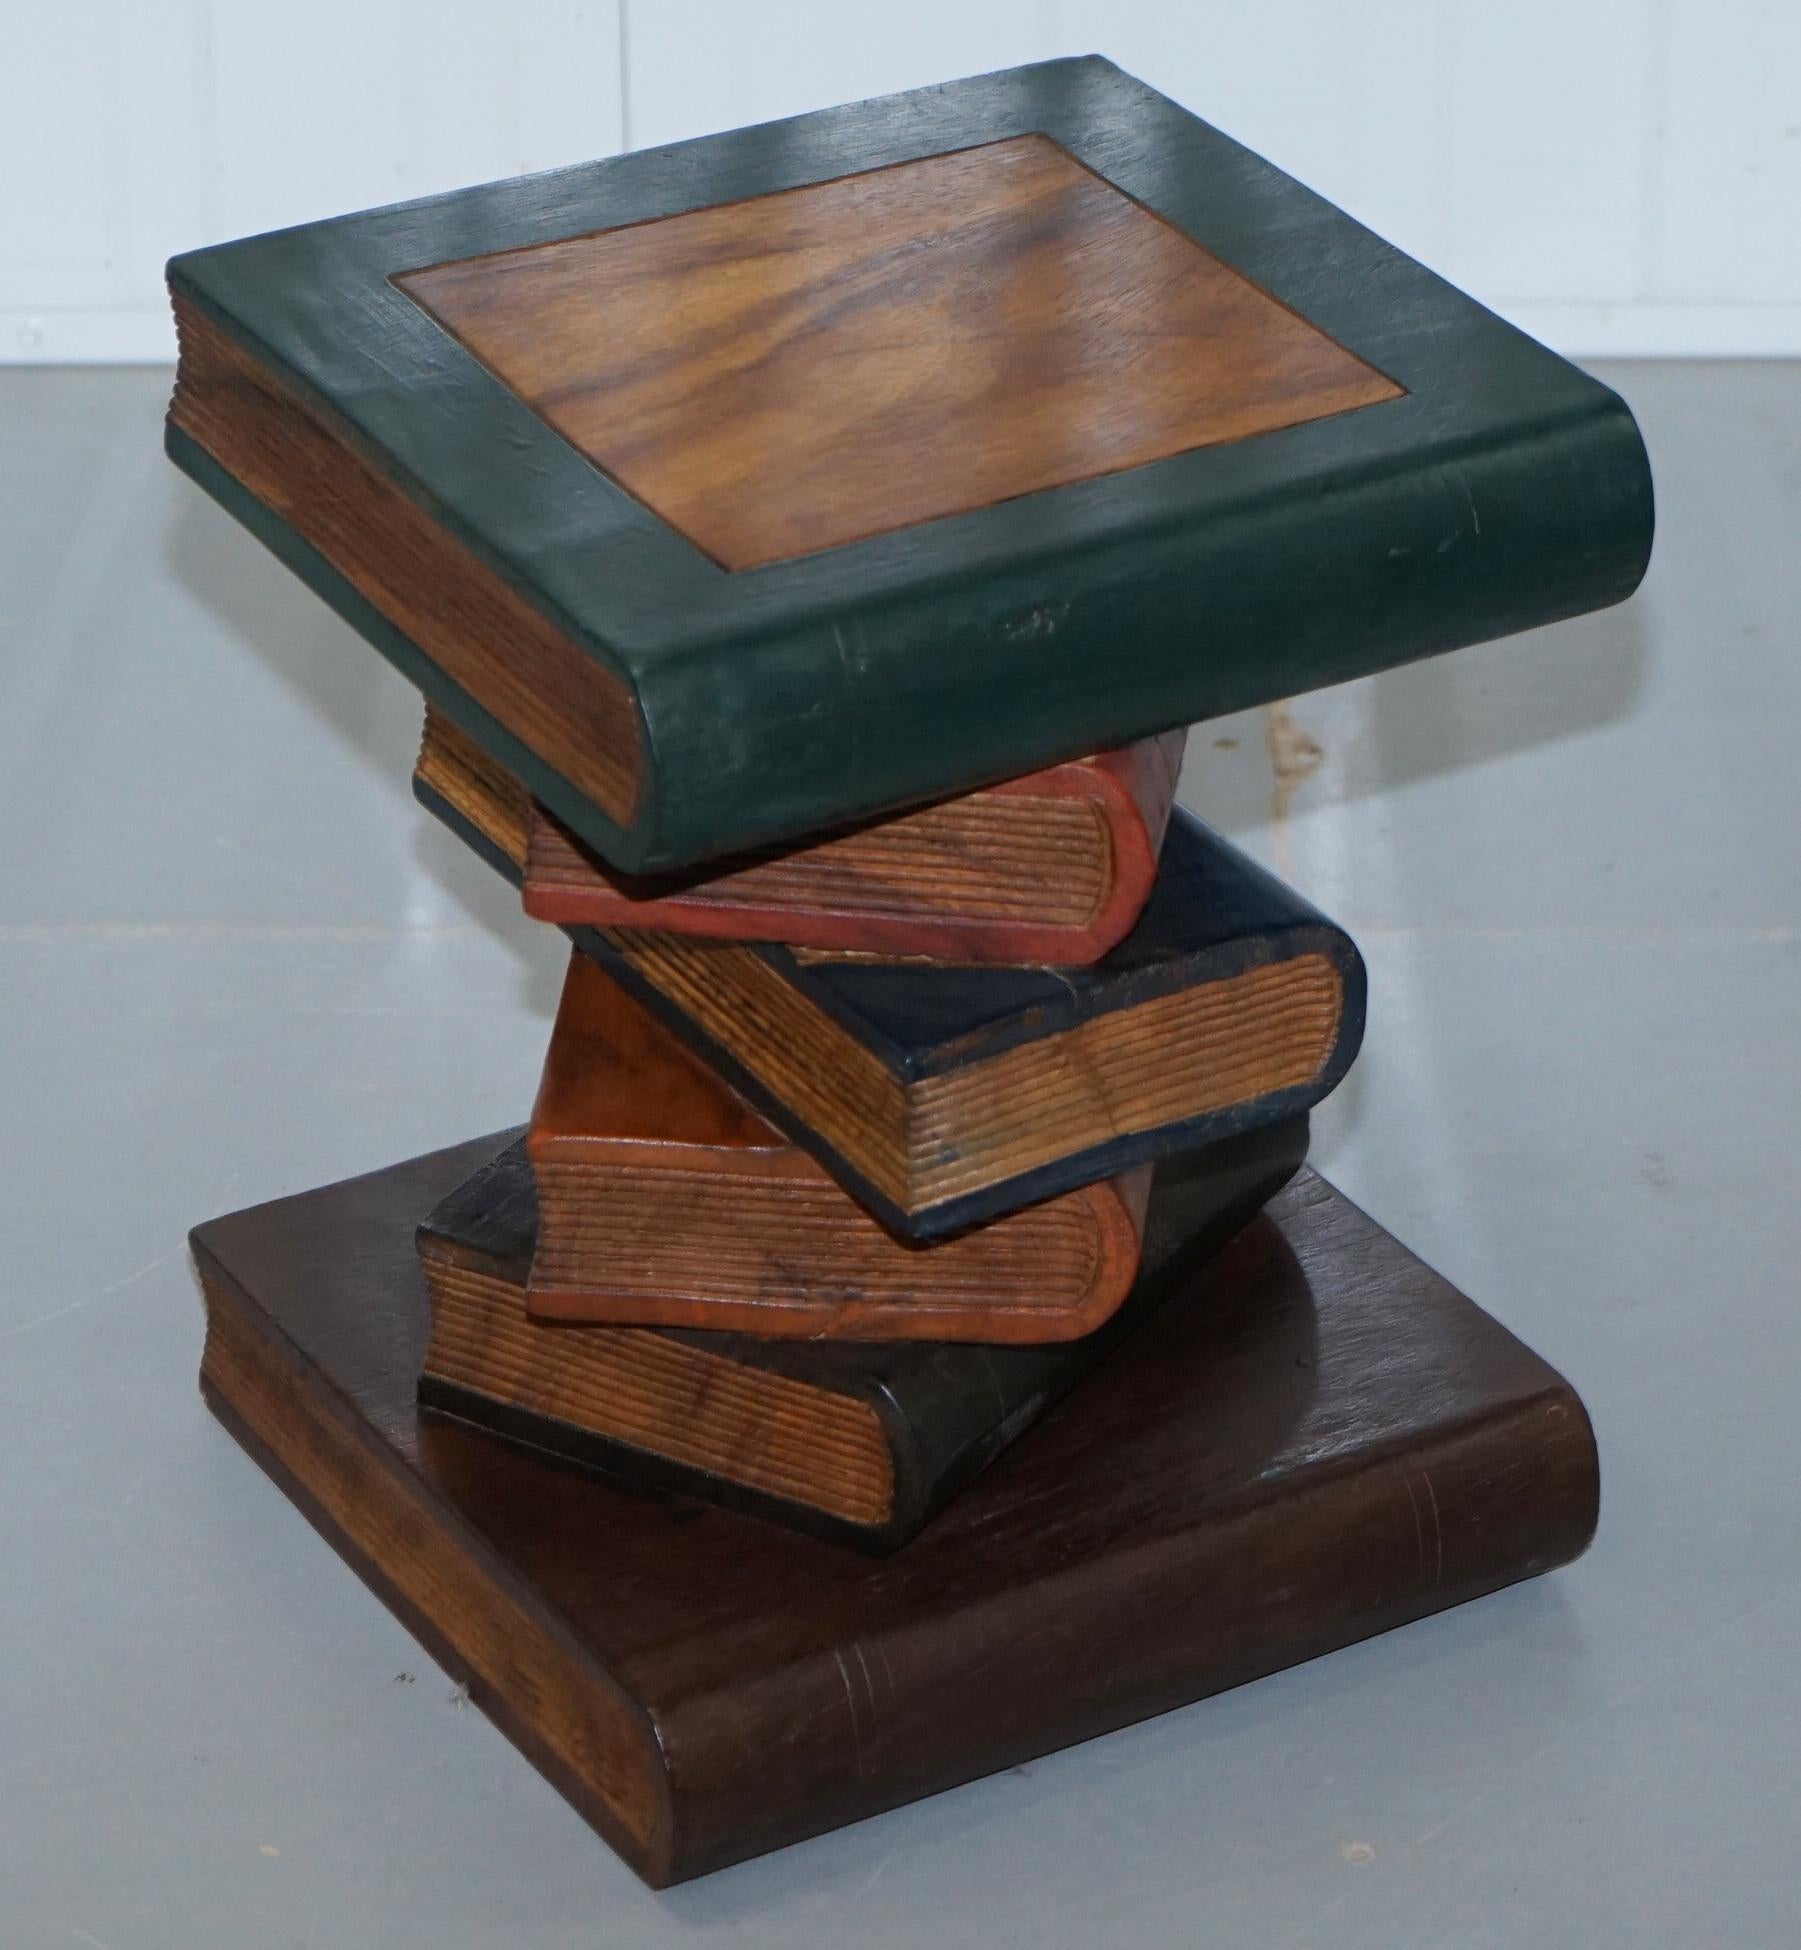 We are delighted to offer for sale this lovely solid hand carved wood side table depicting a stack of Scholars books

This table is part of a large suite of six lots of Scholars books side or coffee tables, all listed under my other items

The